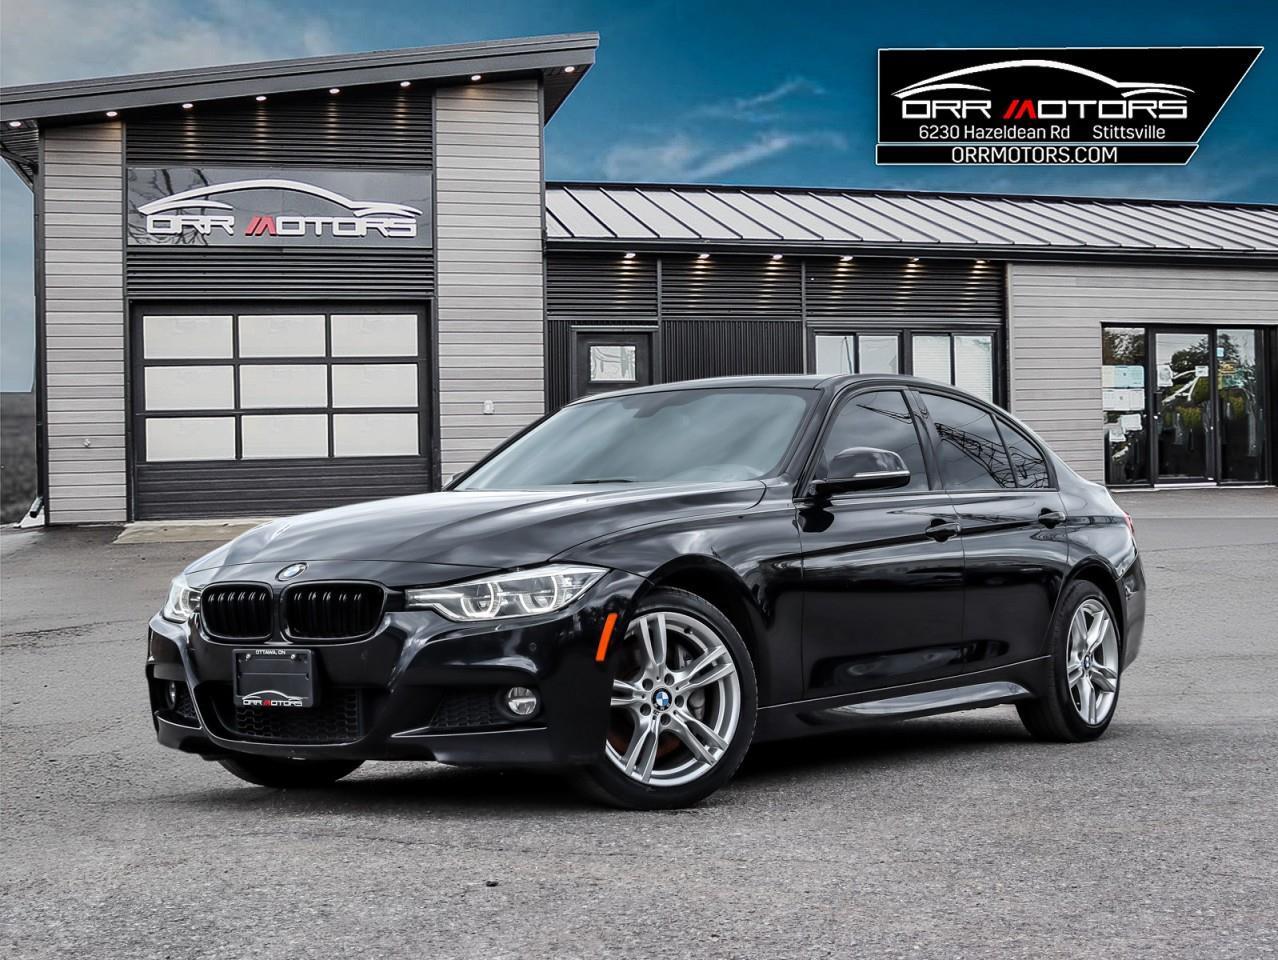 2018 BMW 330I i xDrive SOLD CERTIFIED AND IN EXCELLENT CONDITION